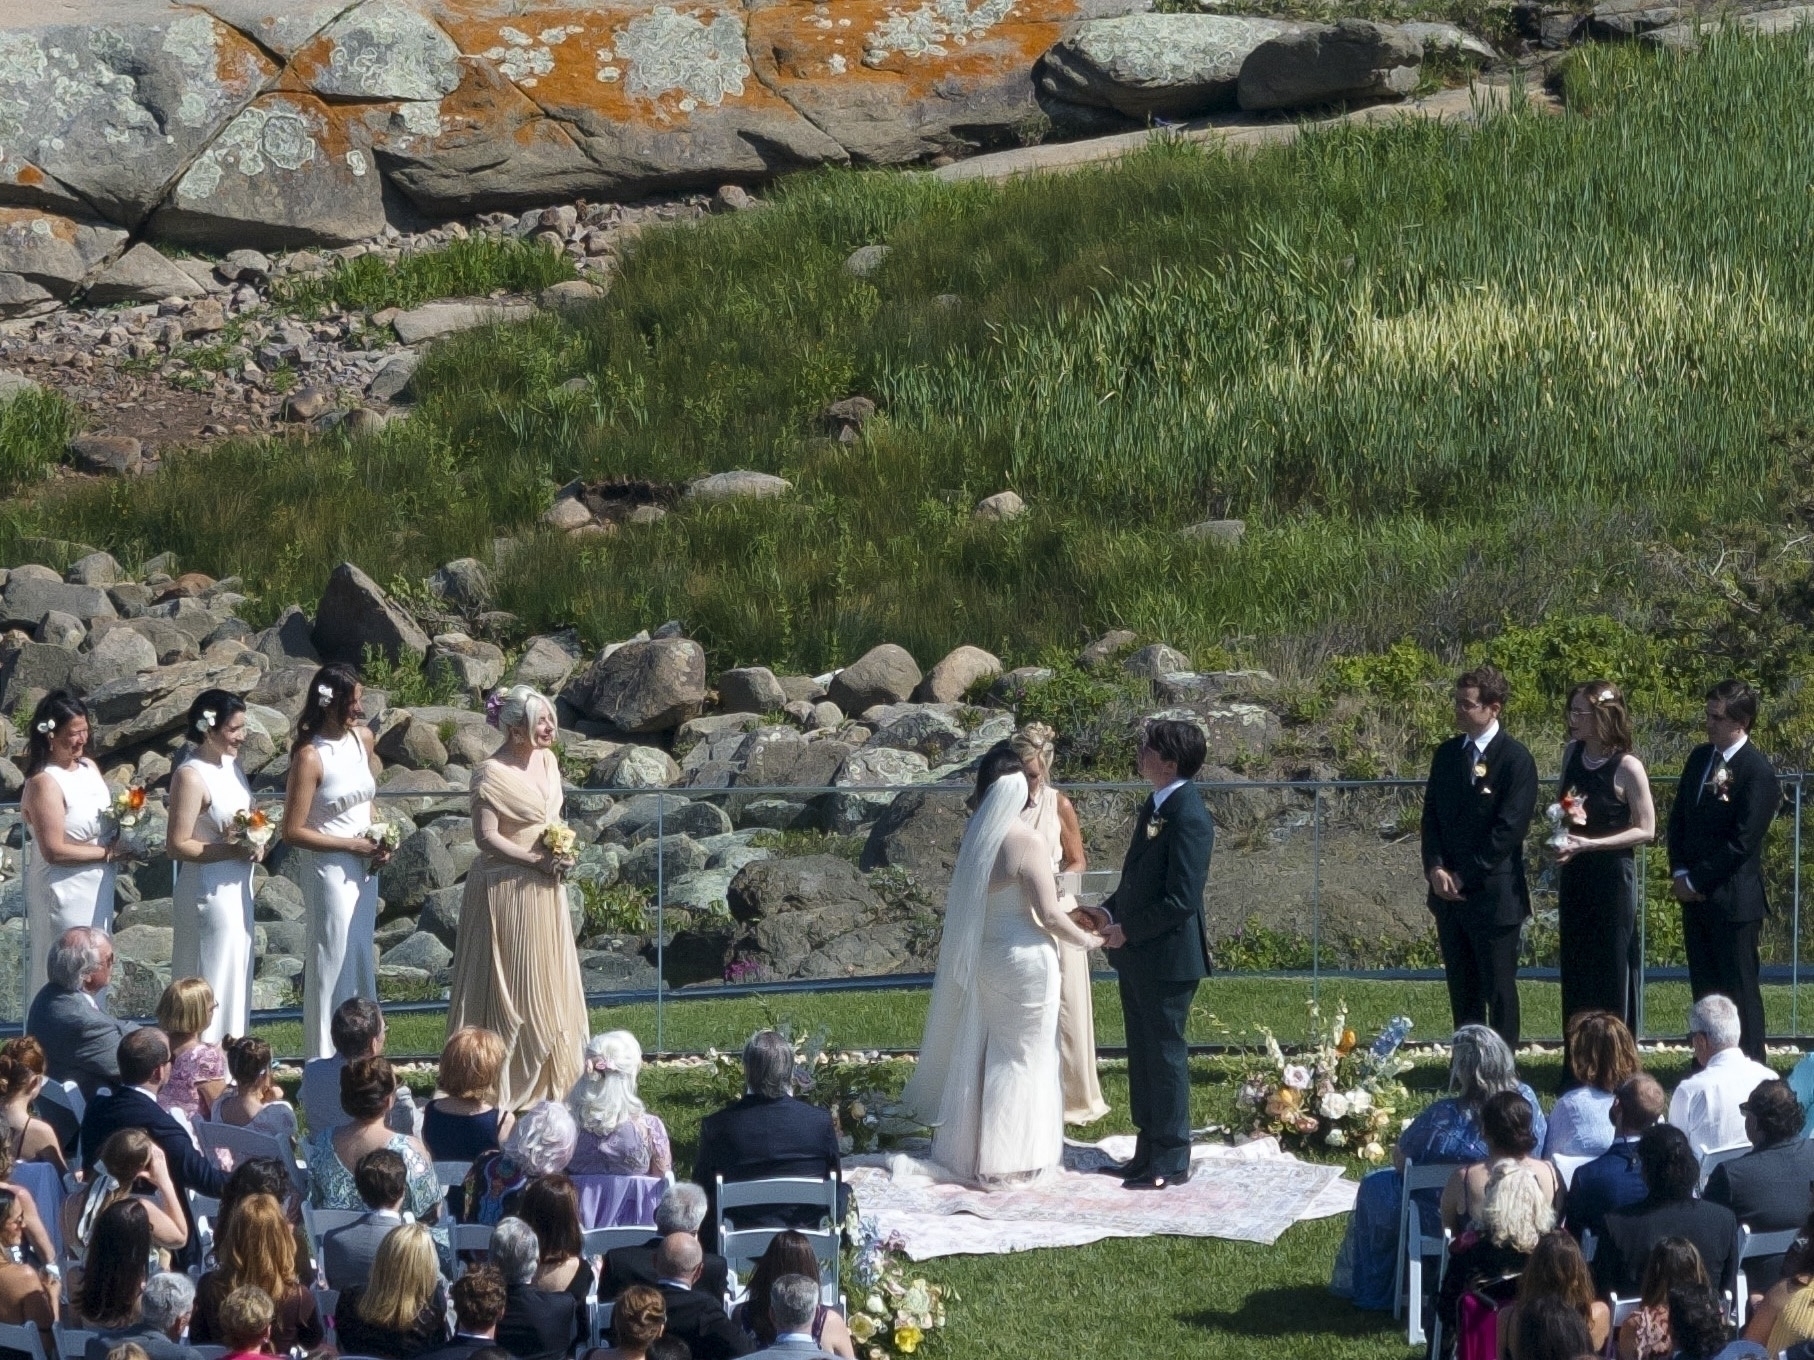 Natali opted for nuptials in the quaint seaside town of York, Maine in the US